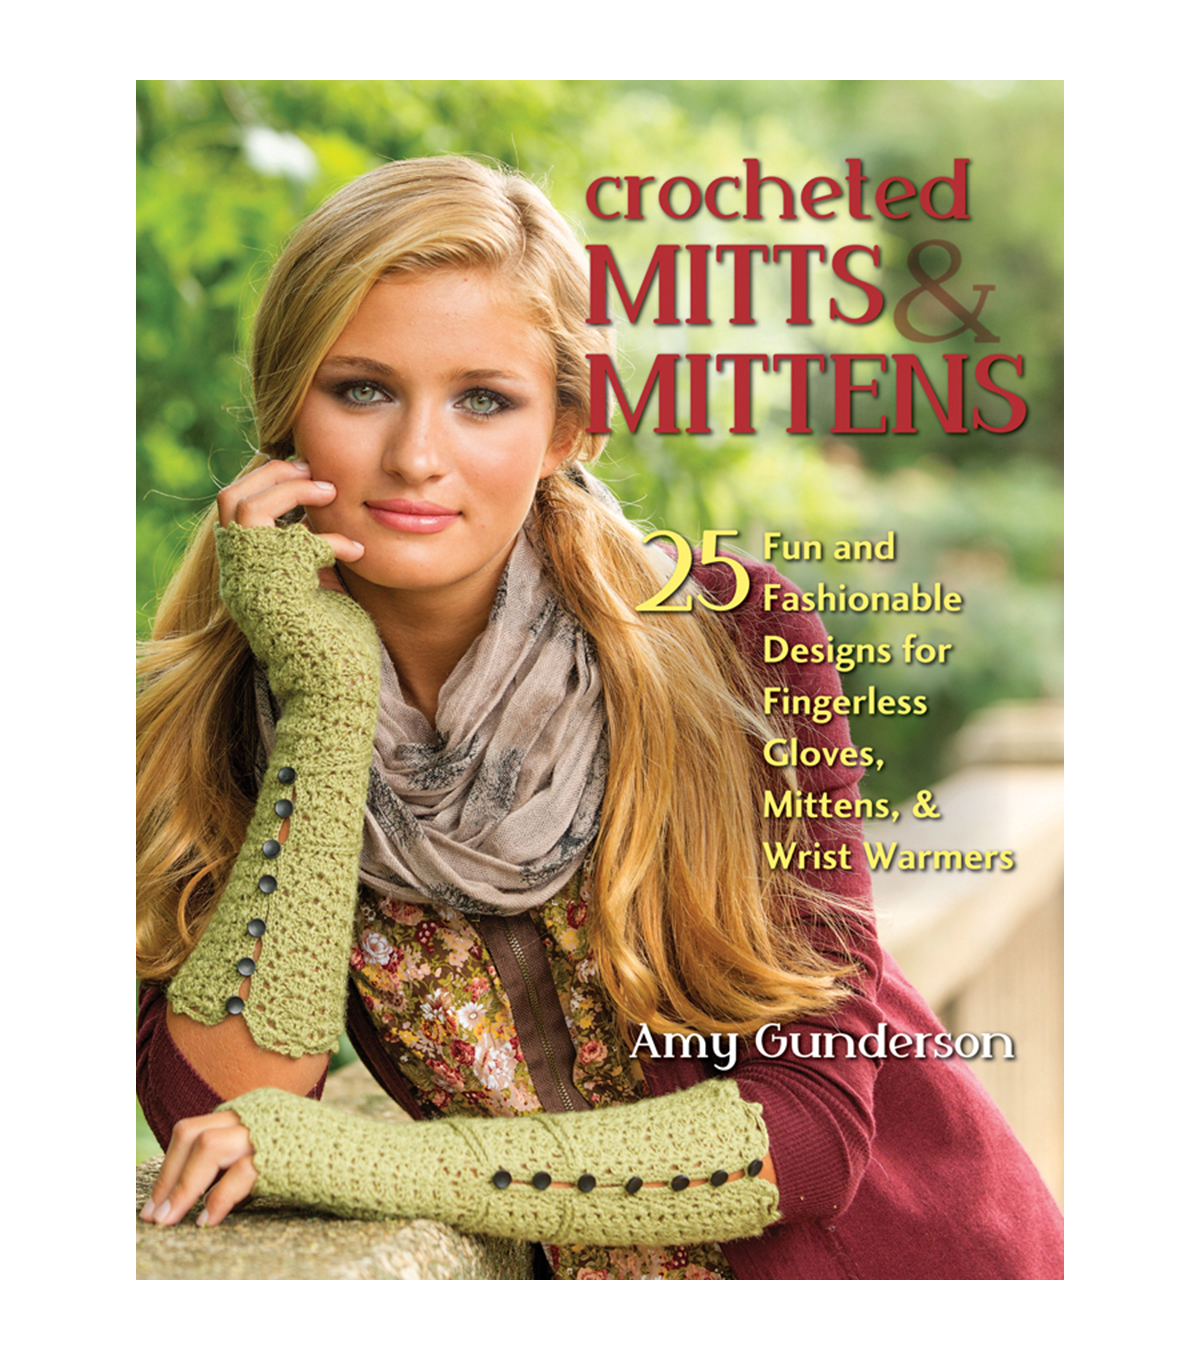 Crocheted Mitts & Mittens by Amy Gunderson 25 Fun and Fashionable Designs for Fingerless Gloves, Mittens, & Wrist Warmers from Stackpole